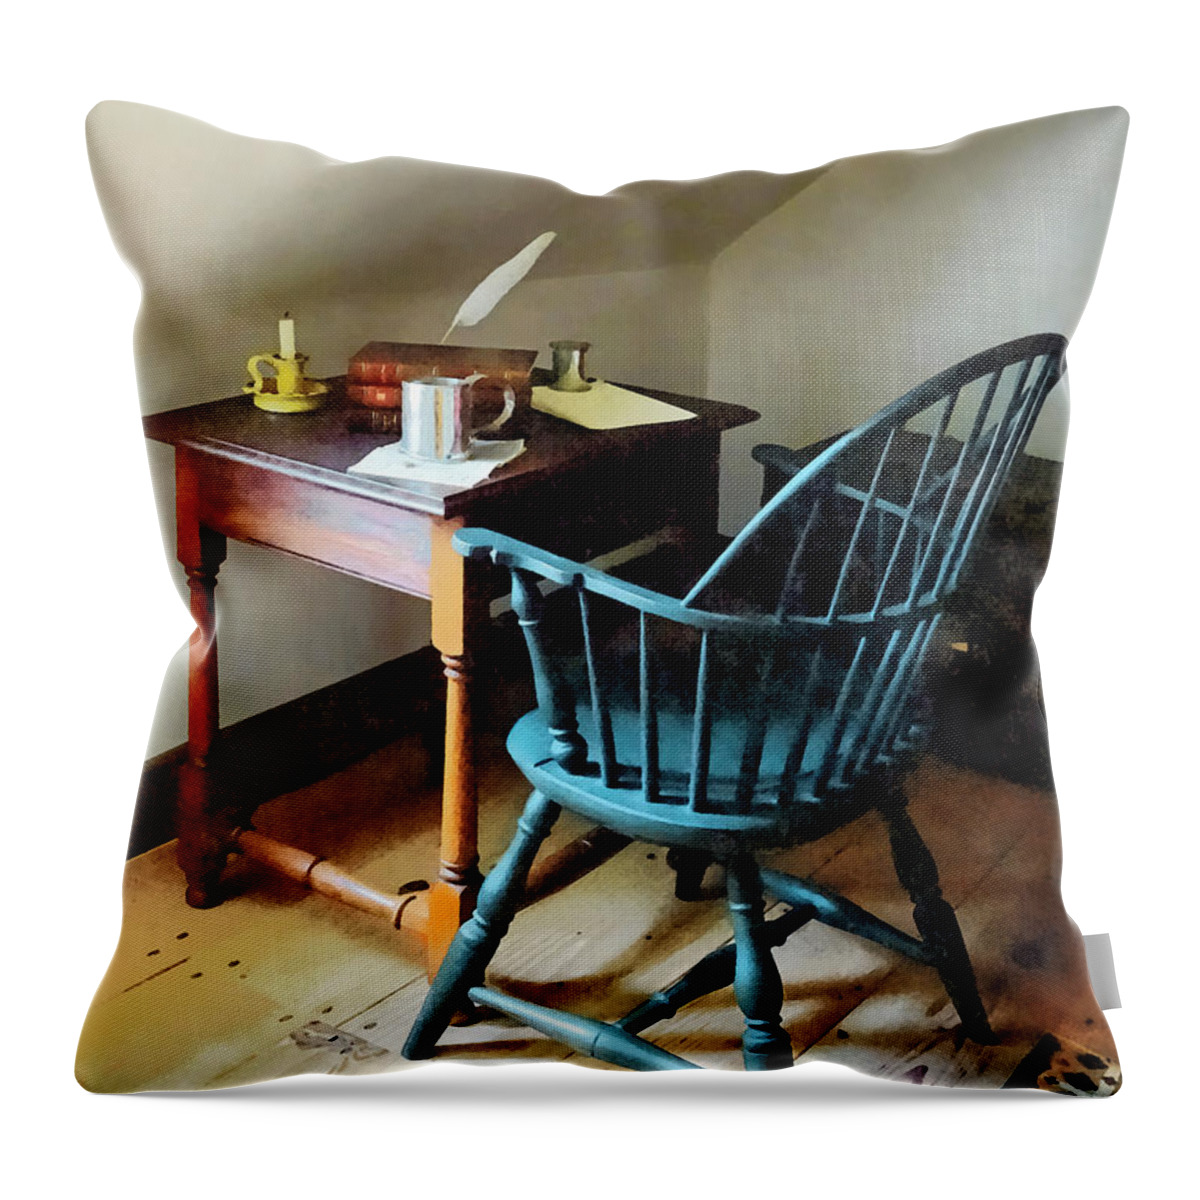 Lawyer Throw Pillow featuring the photograph Lawyer's Desk by Susan Savad